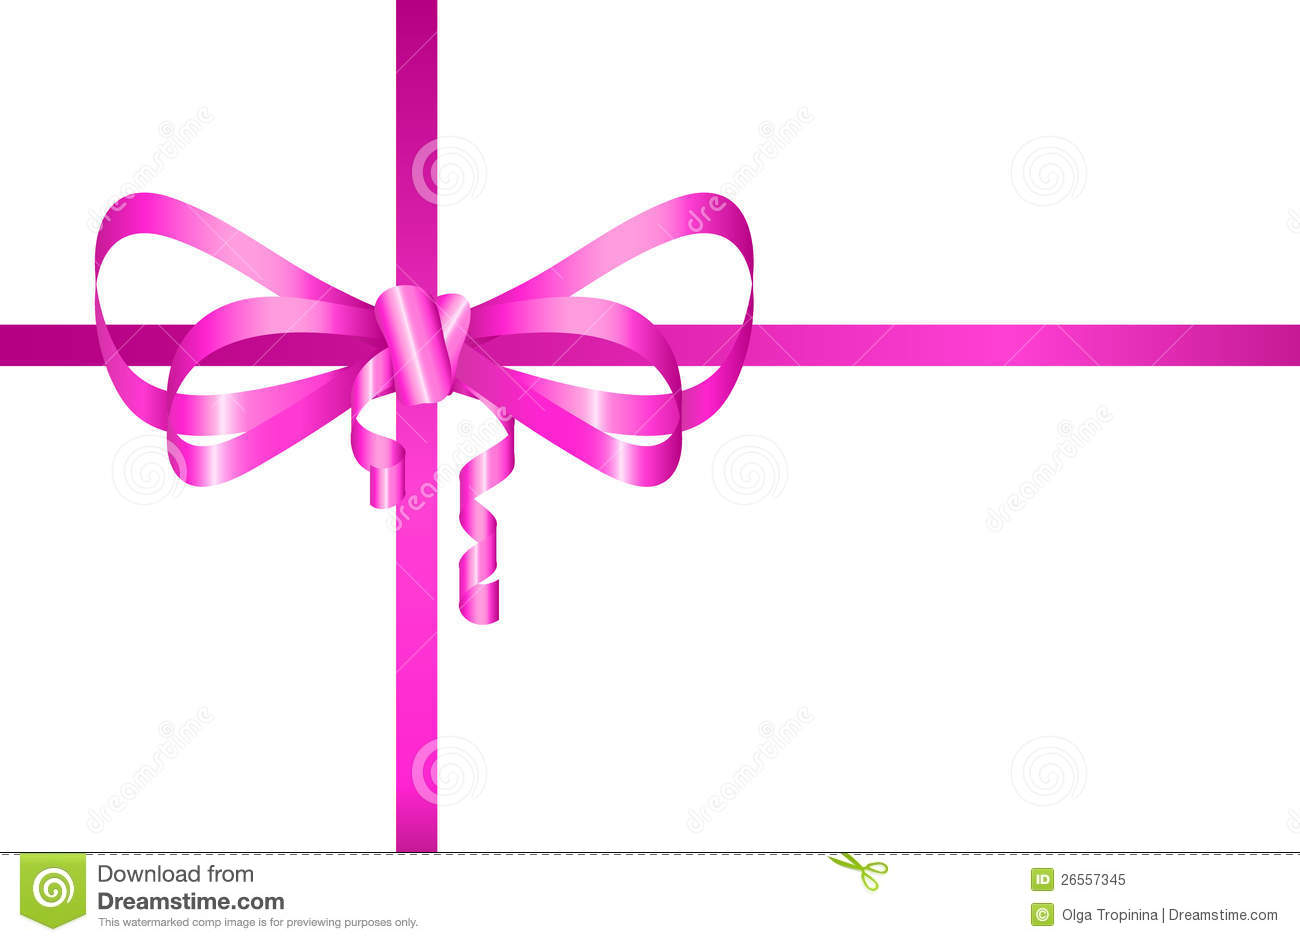 Pink Bow Present Royalty Free Stock Photo   Image  26557345